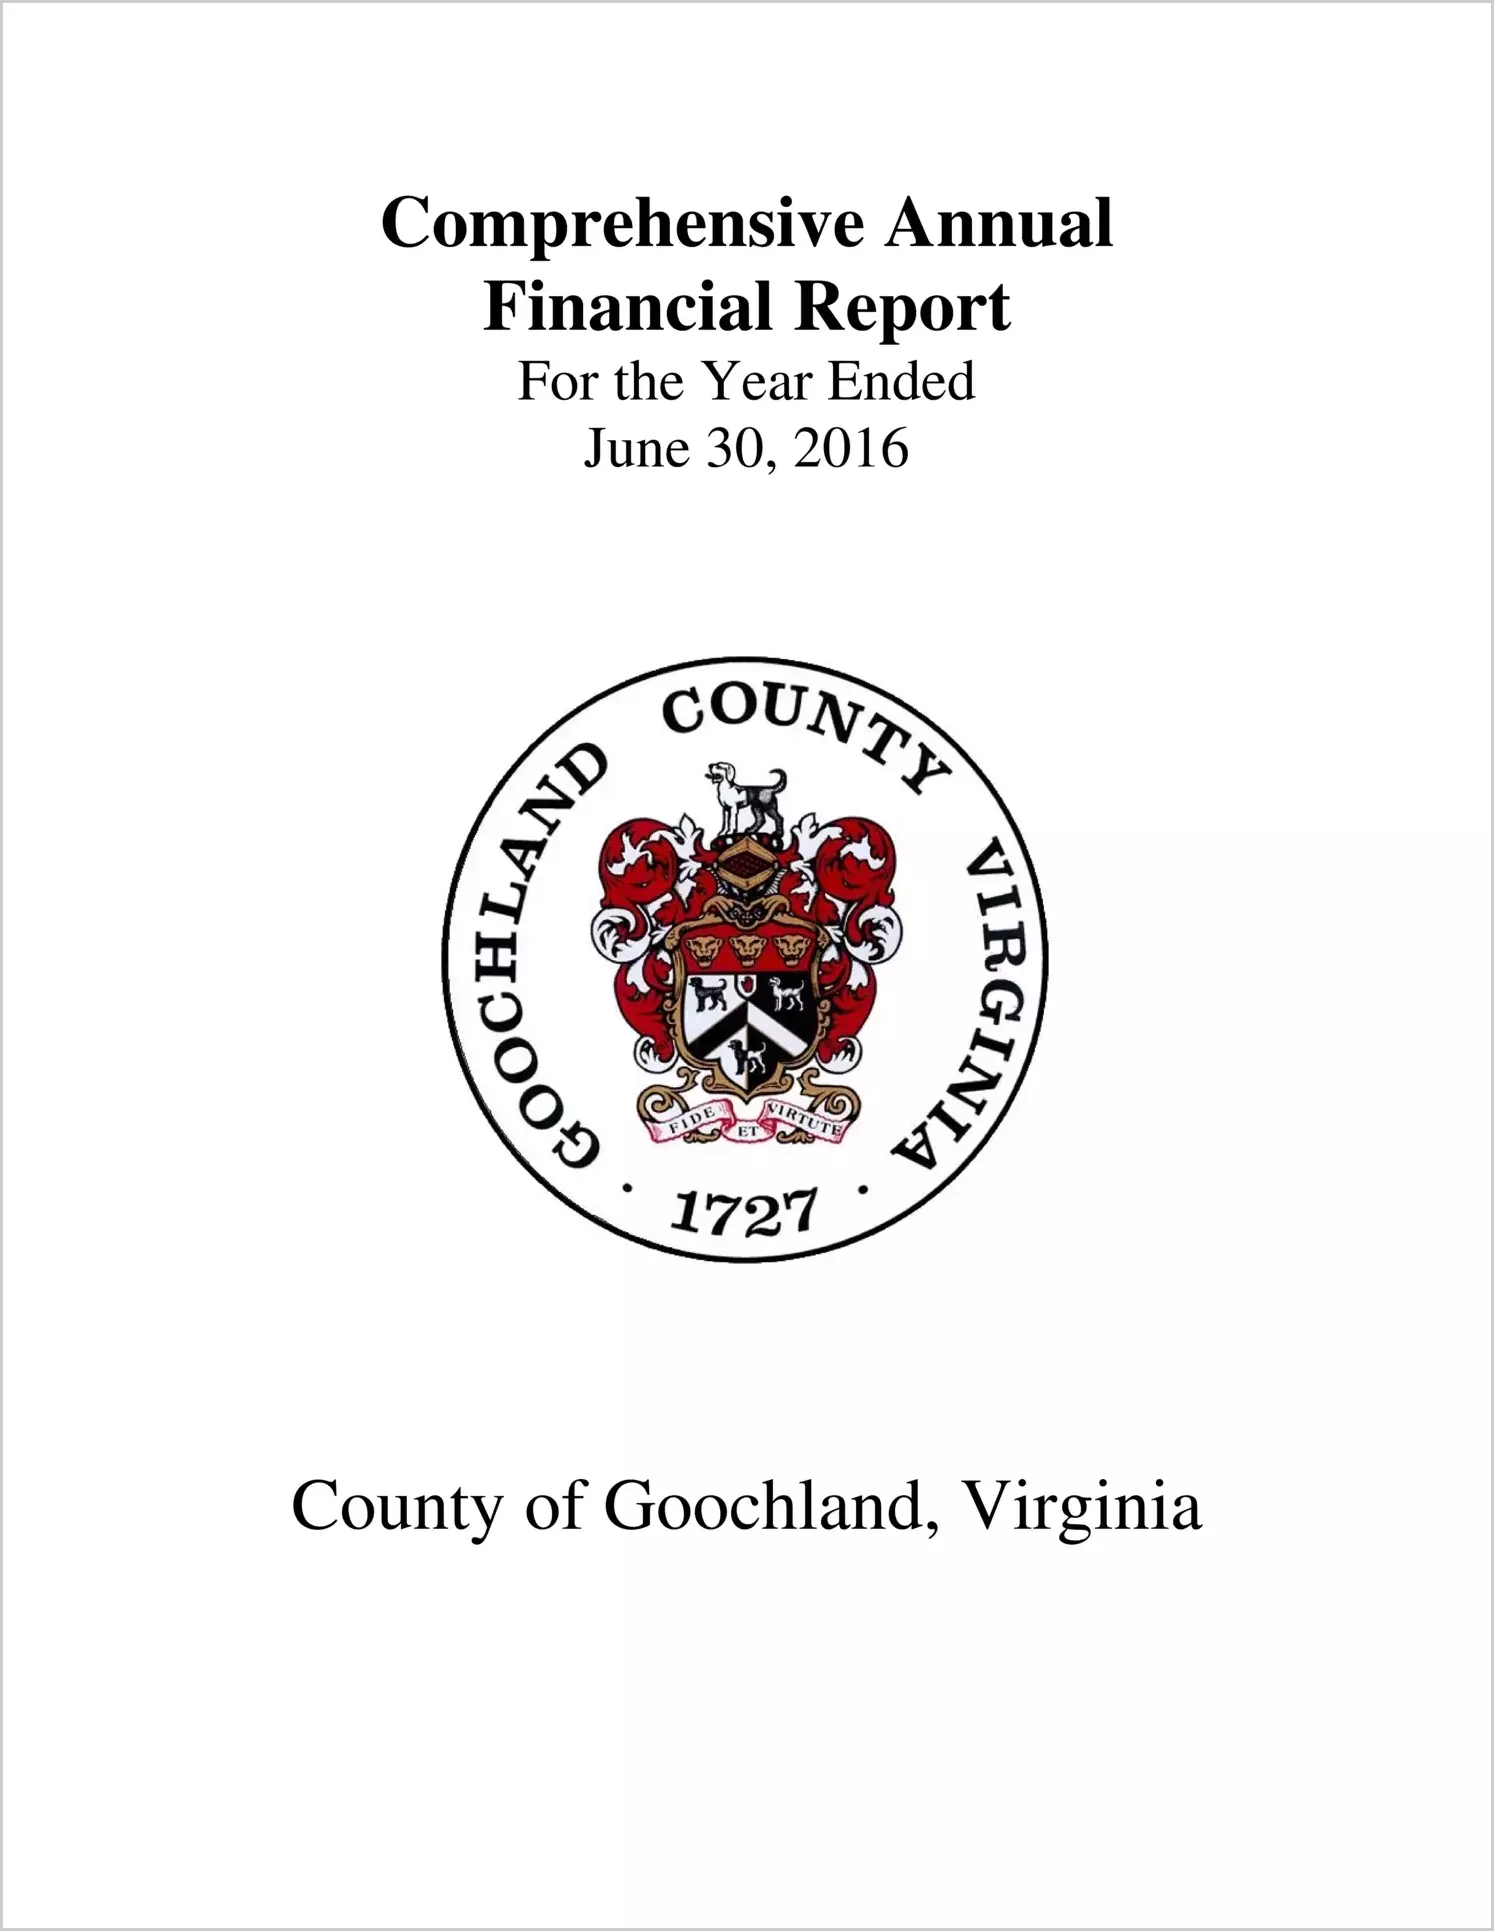 2016 Annual Financial Report for County of Goochland